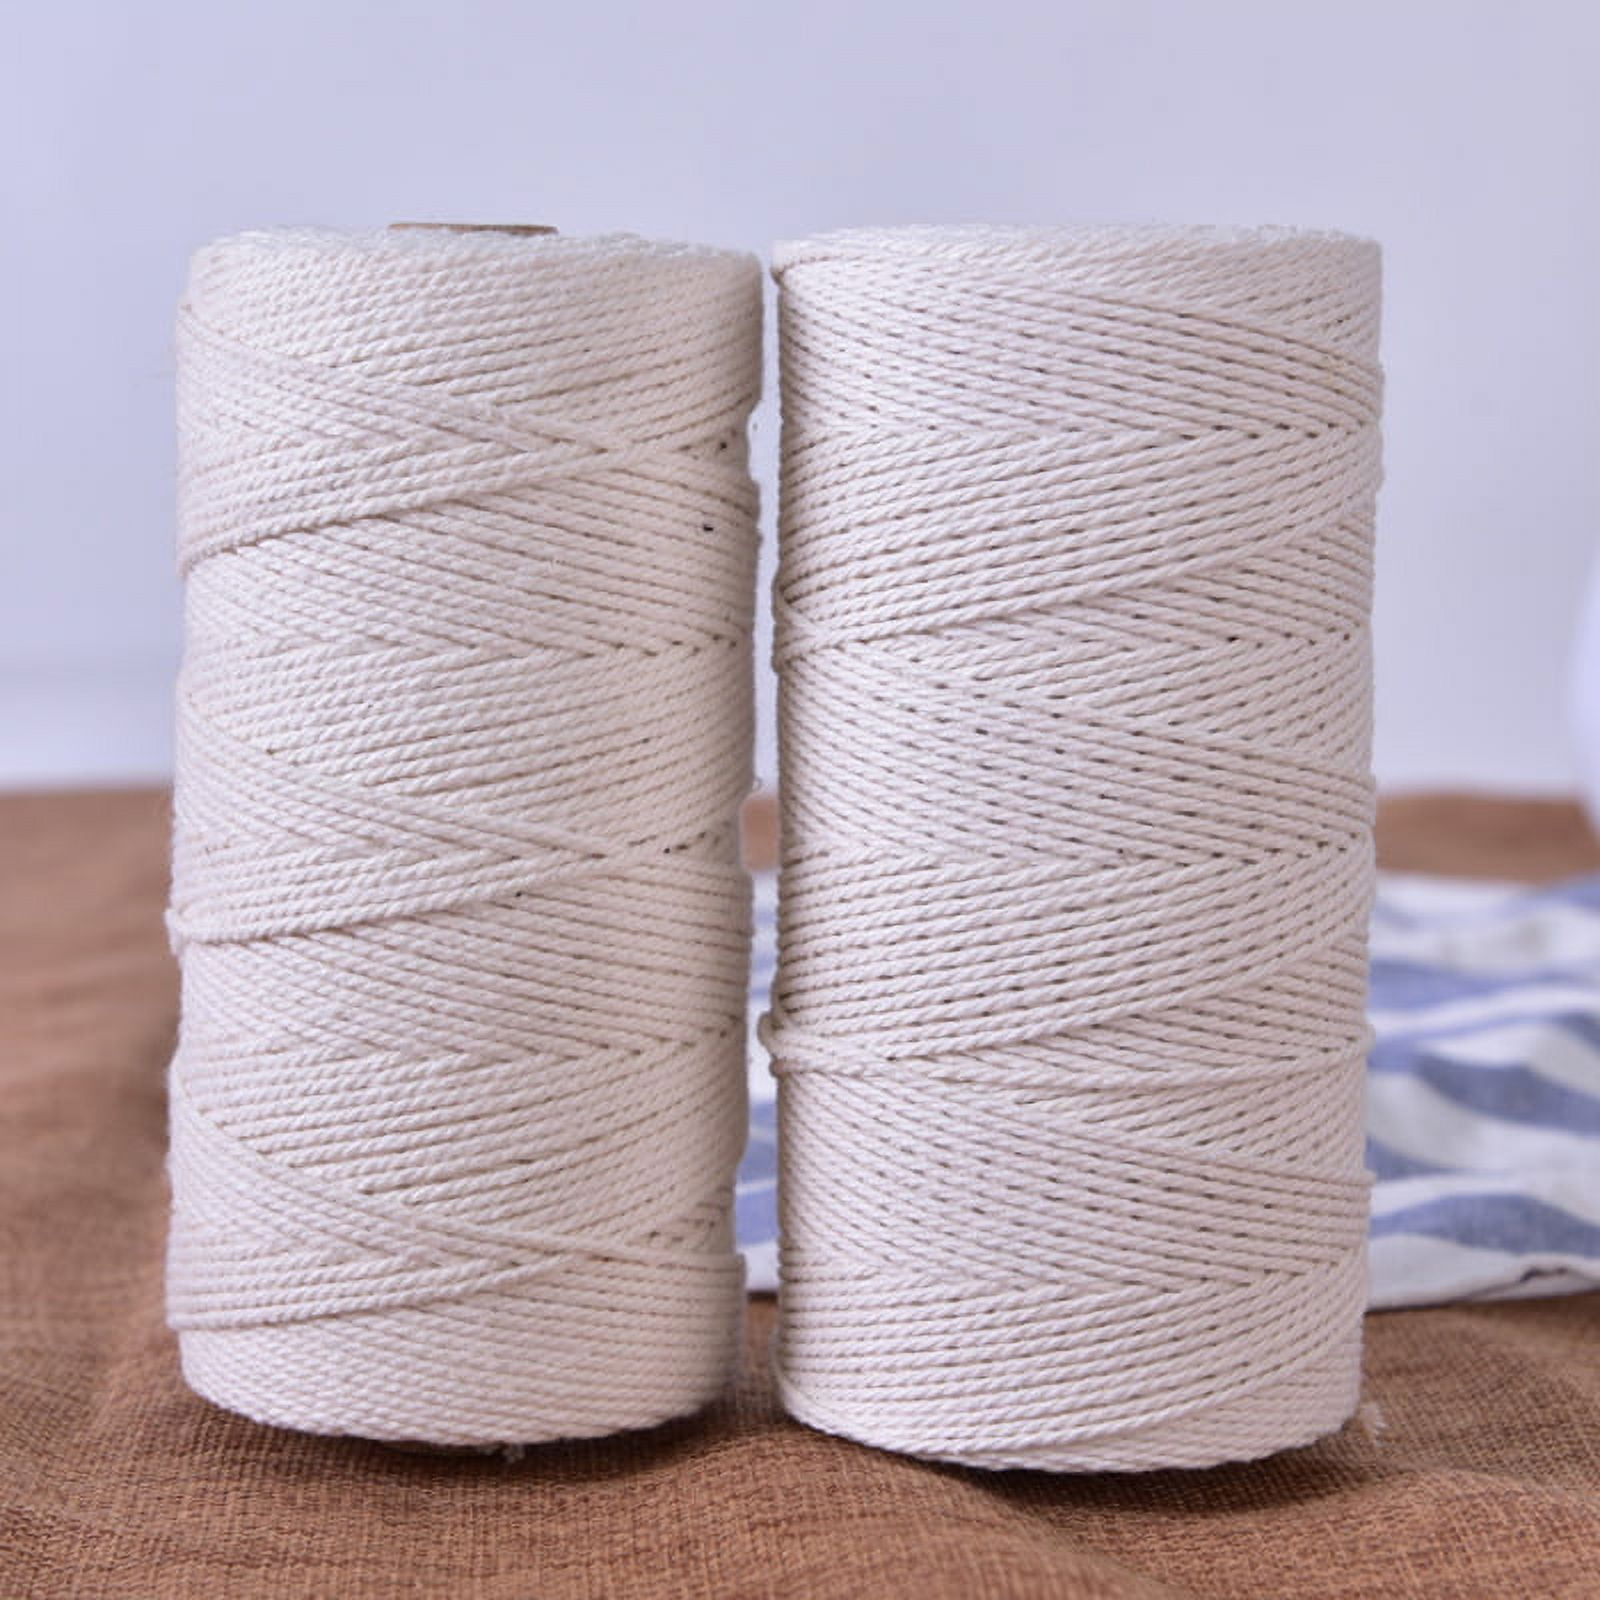  66 ft Natural White Rope,5/16 inch Cotton Rope,3Ply